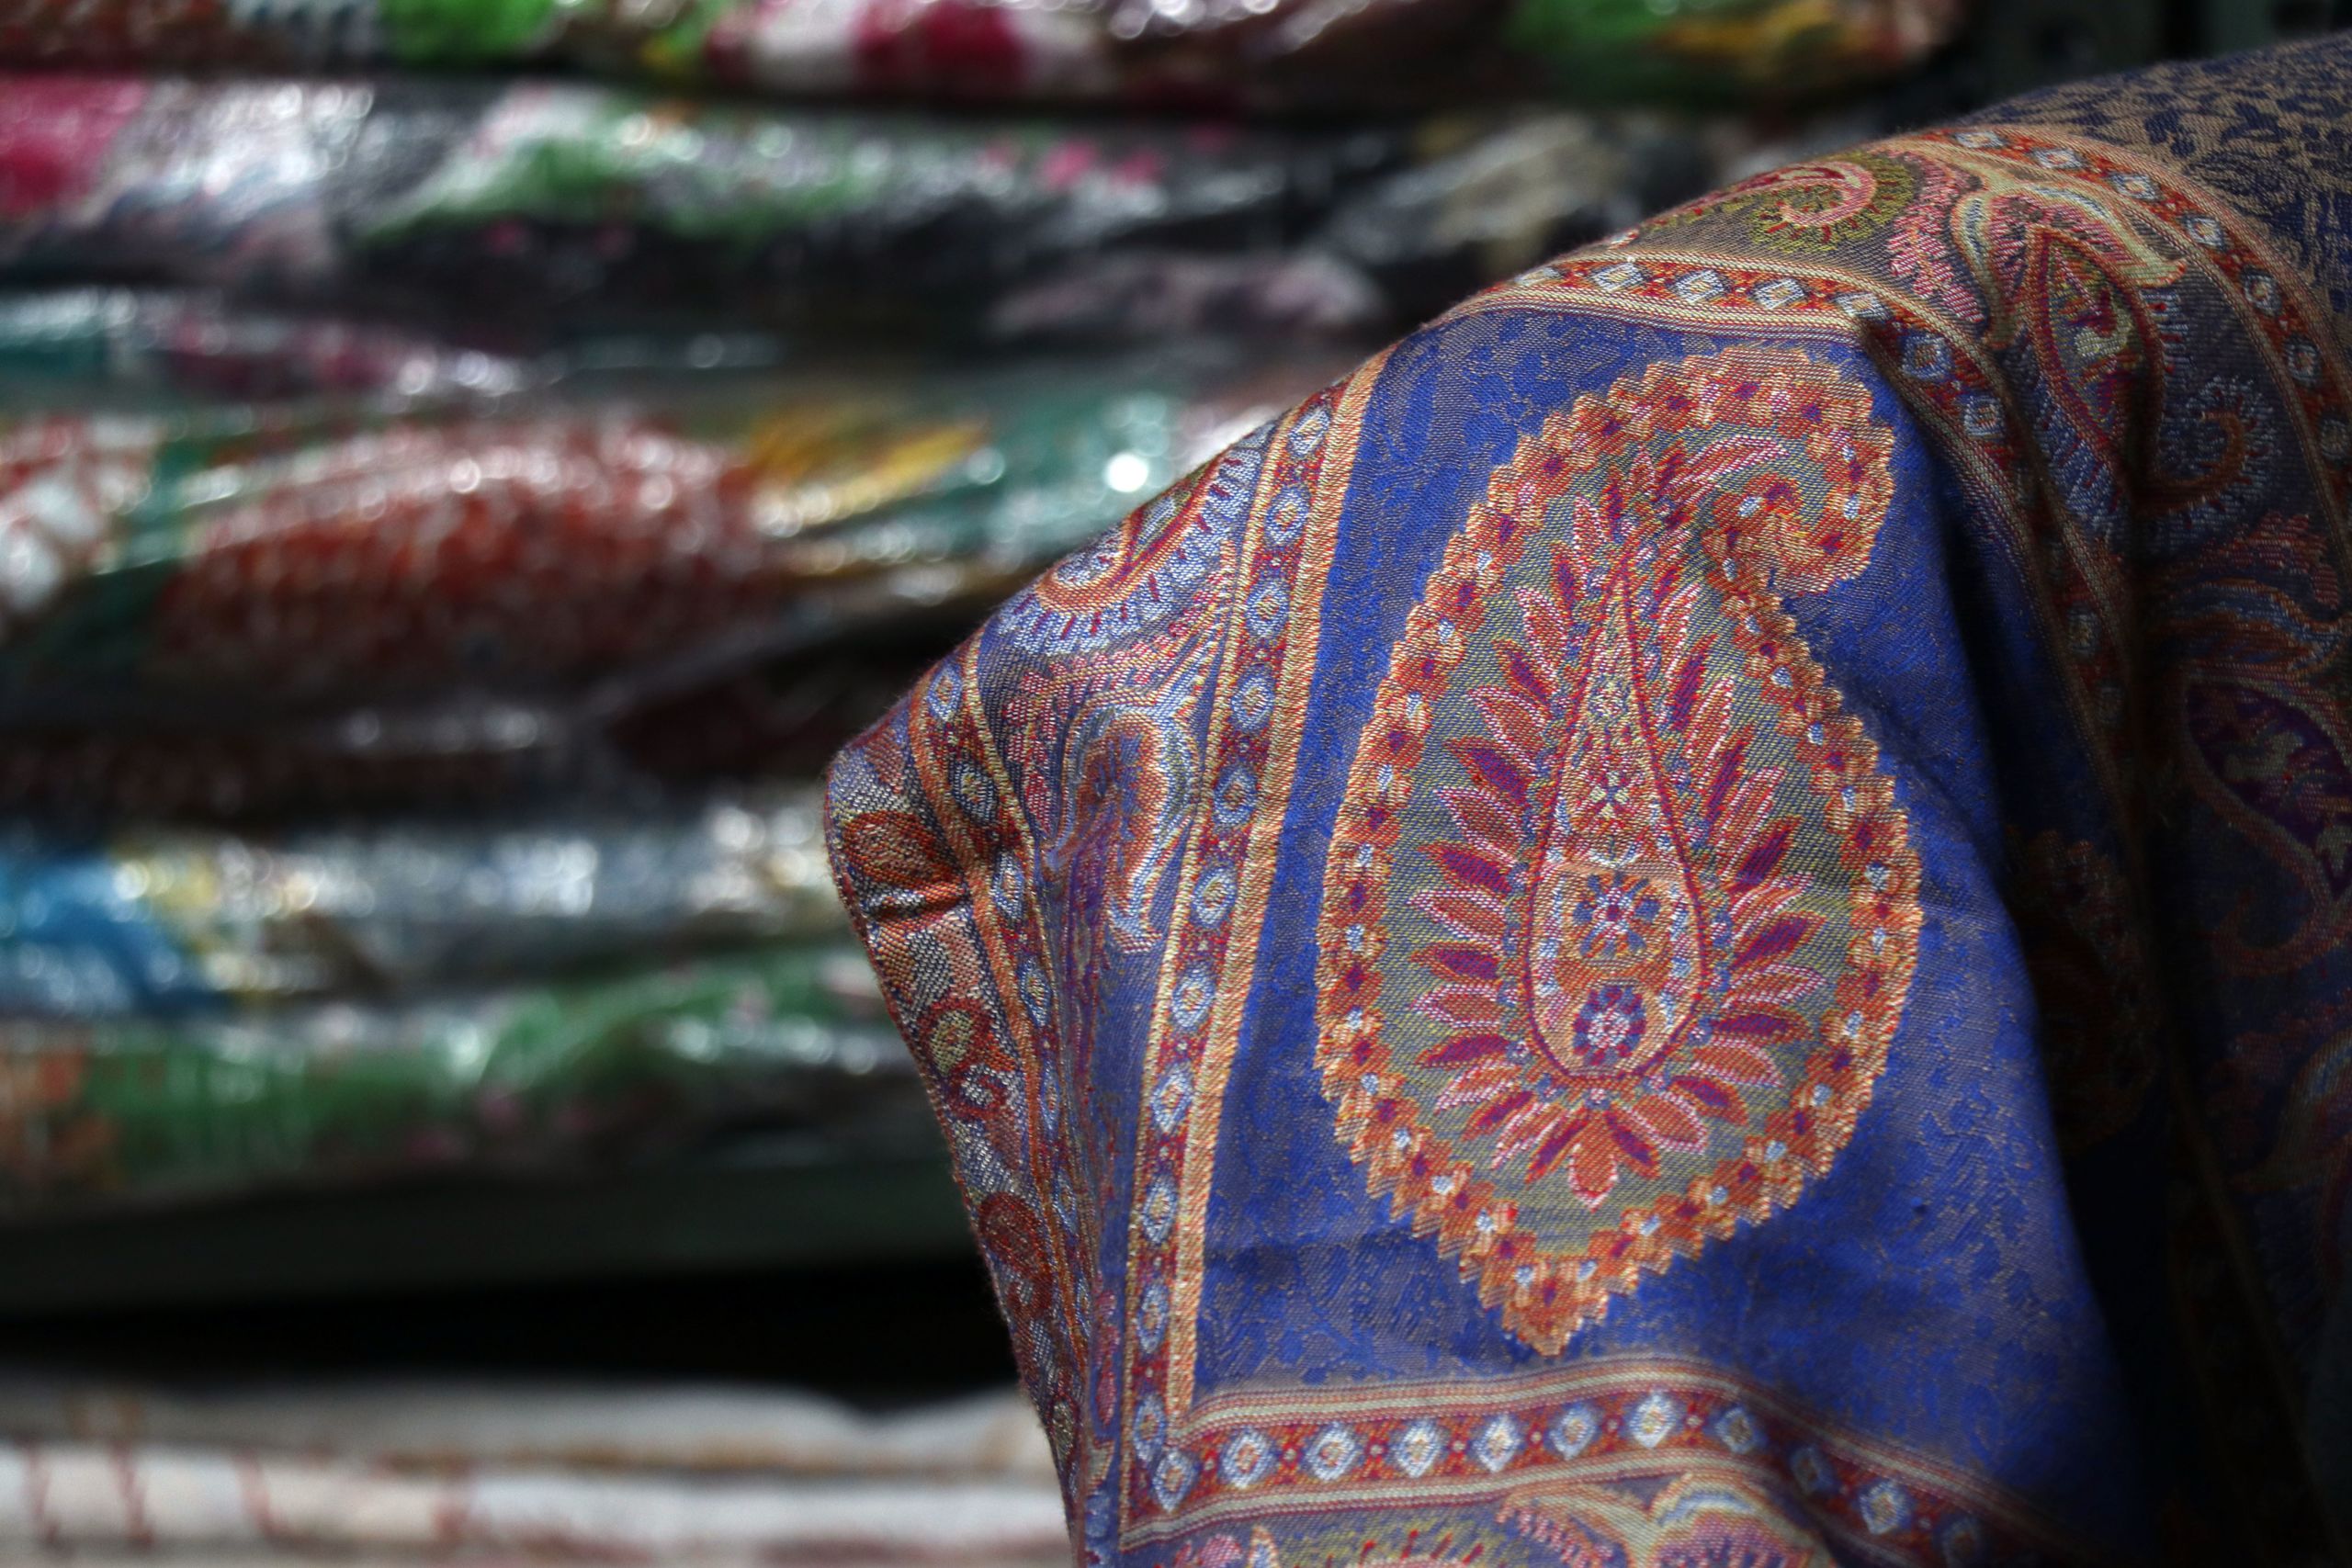 Indian textiles conquer globalisation